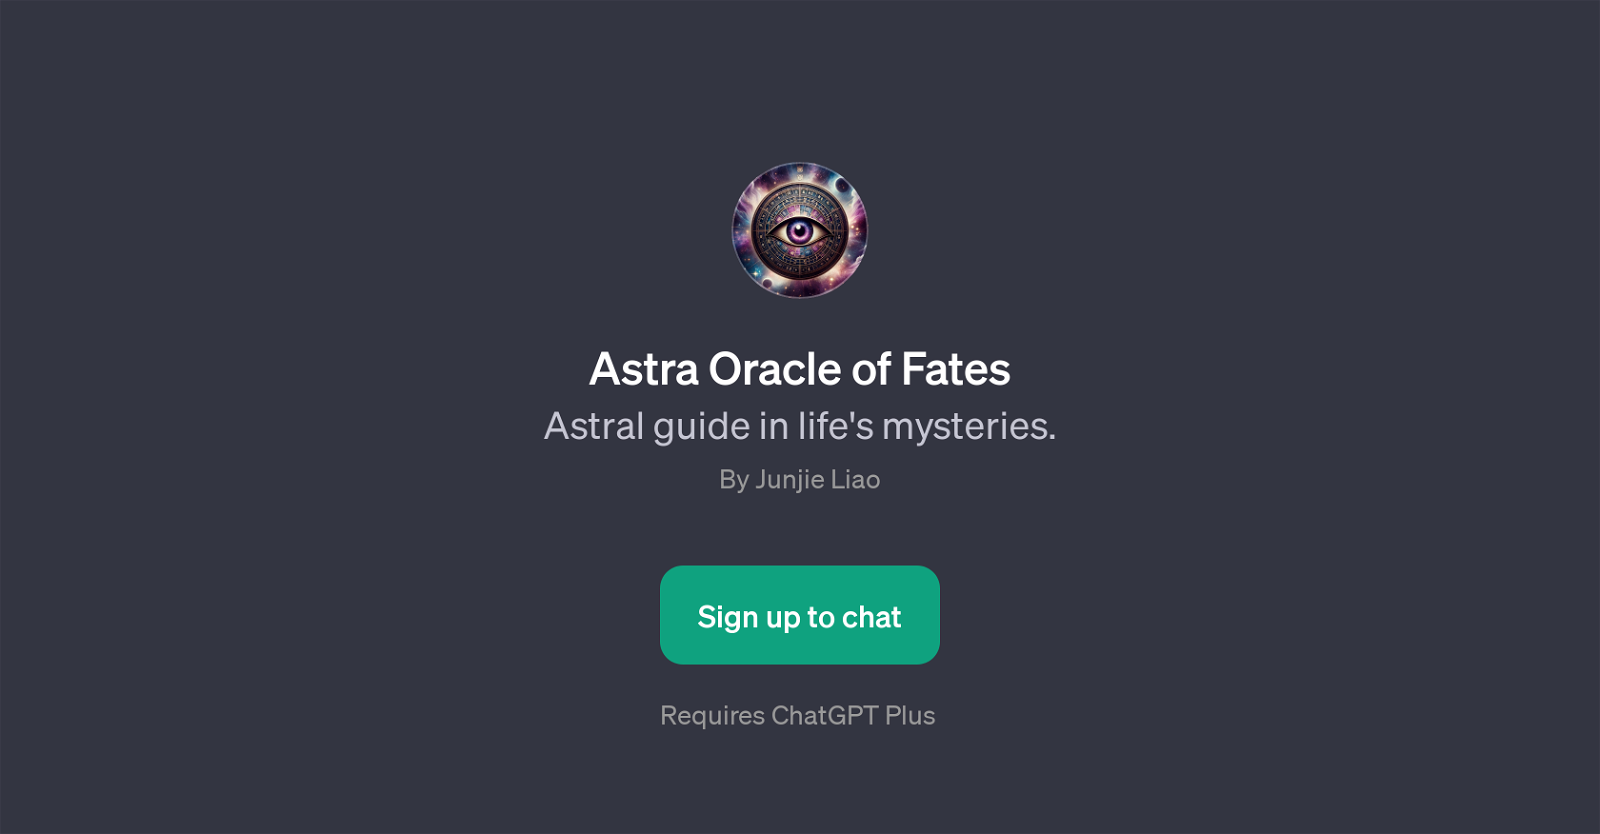 Astra Oracle of Fates website